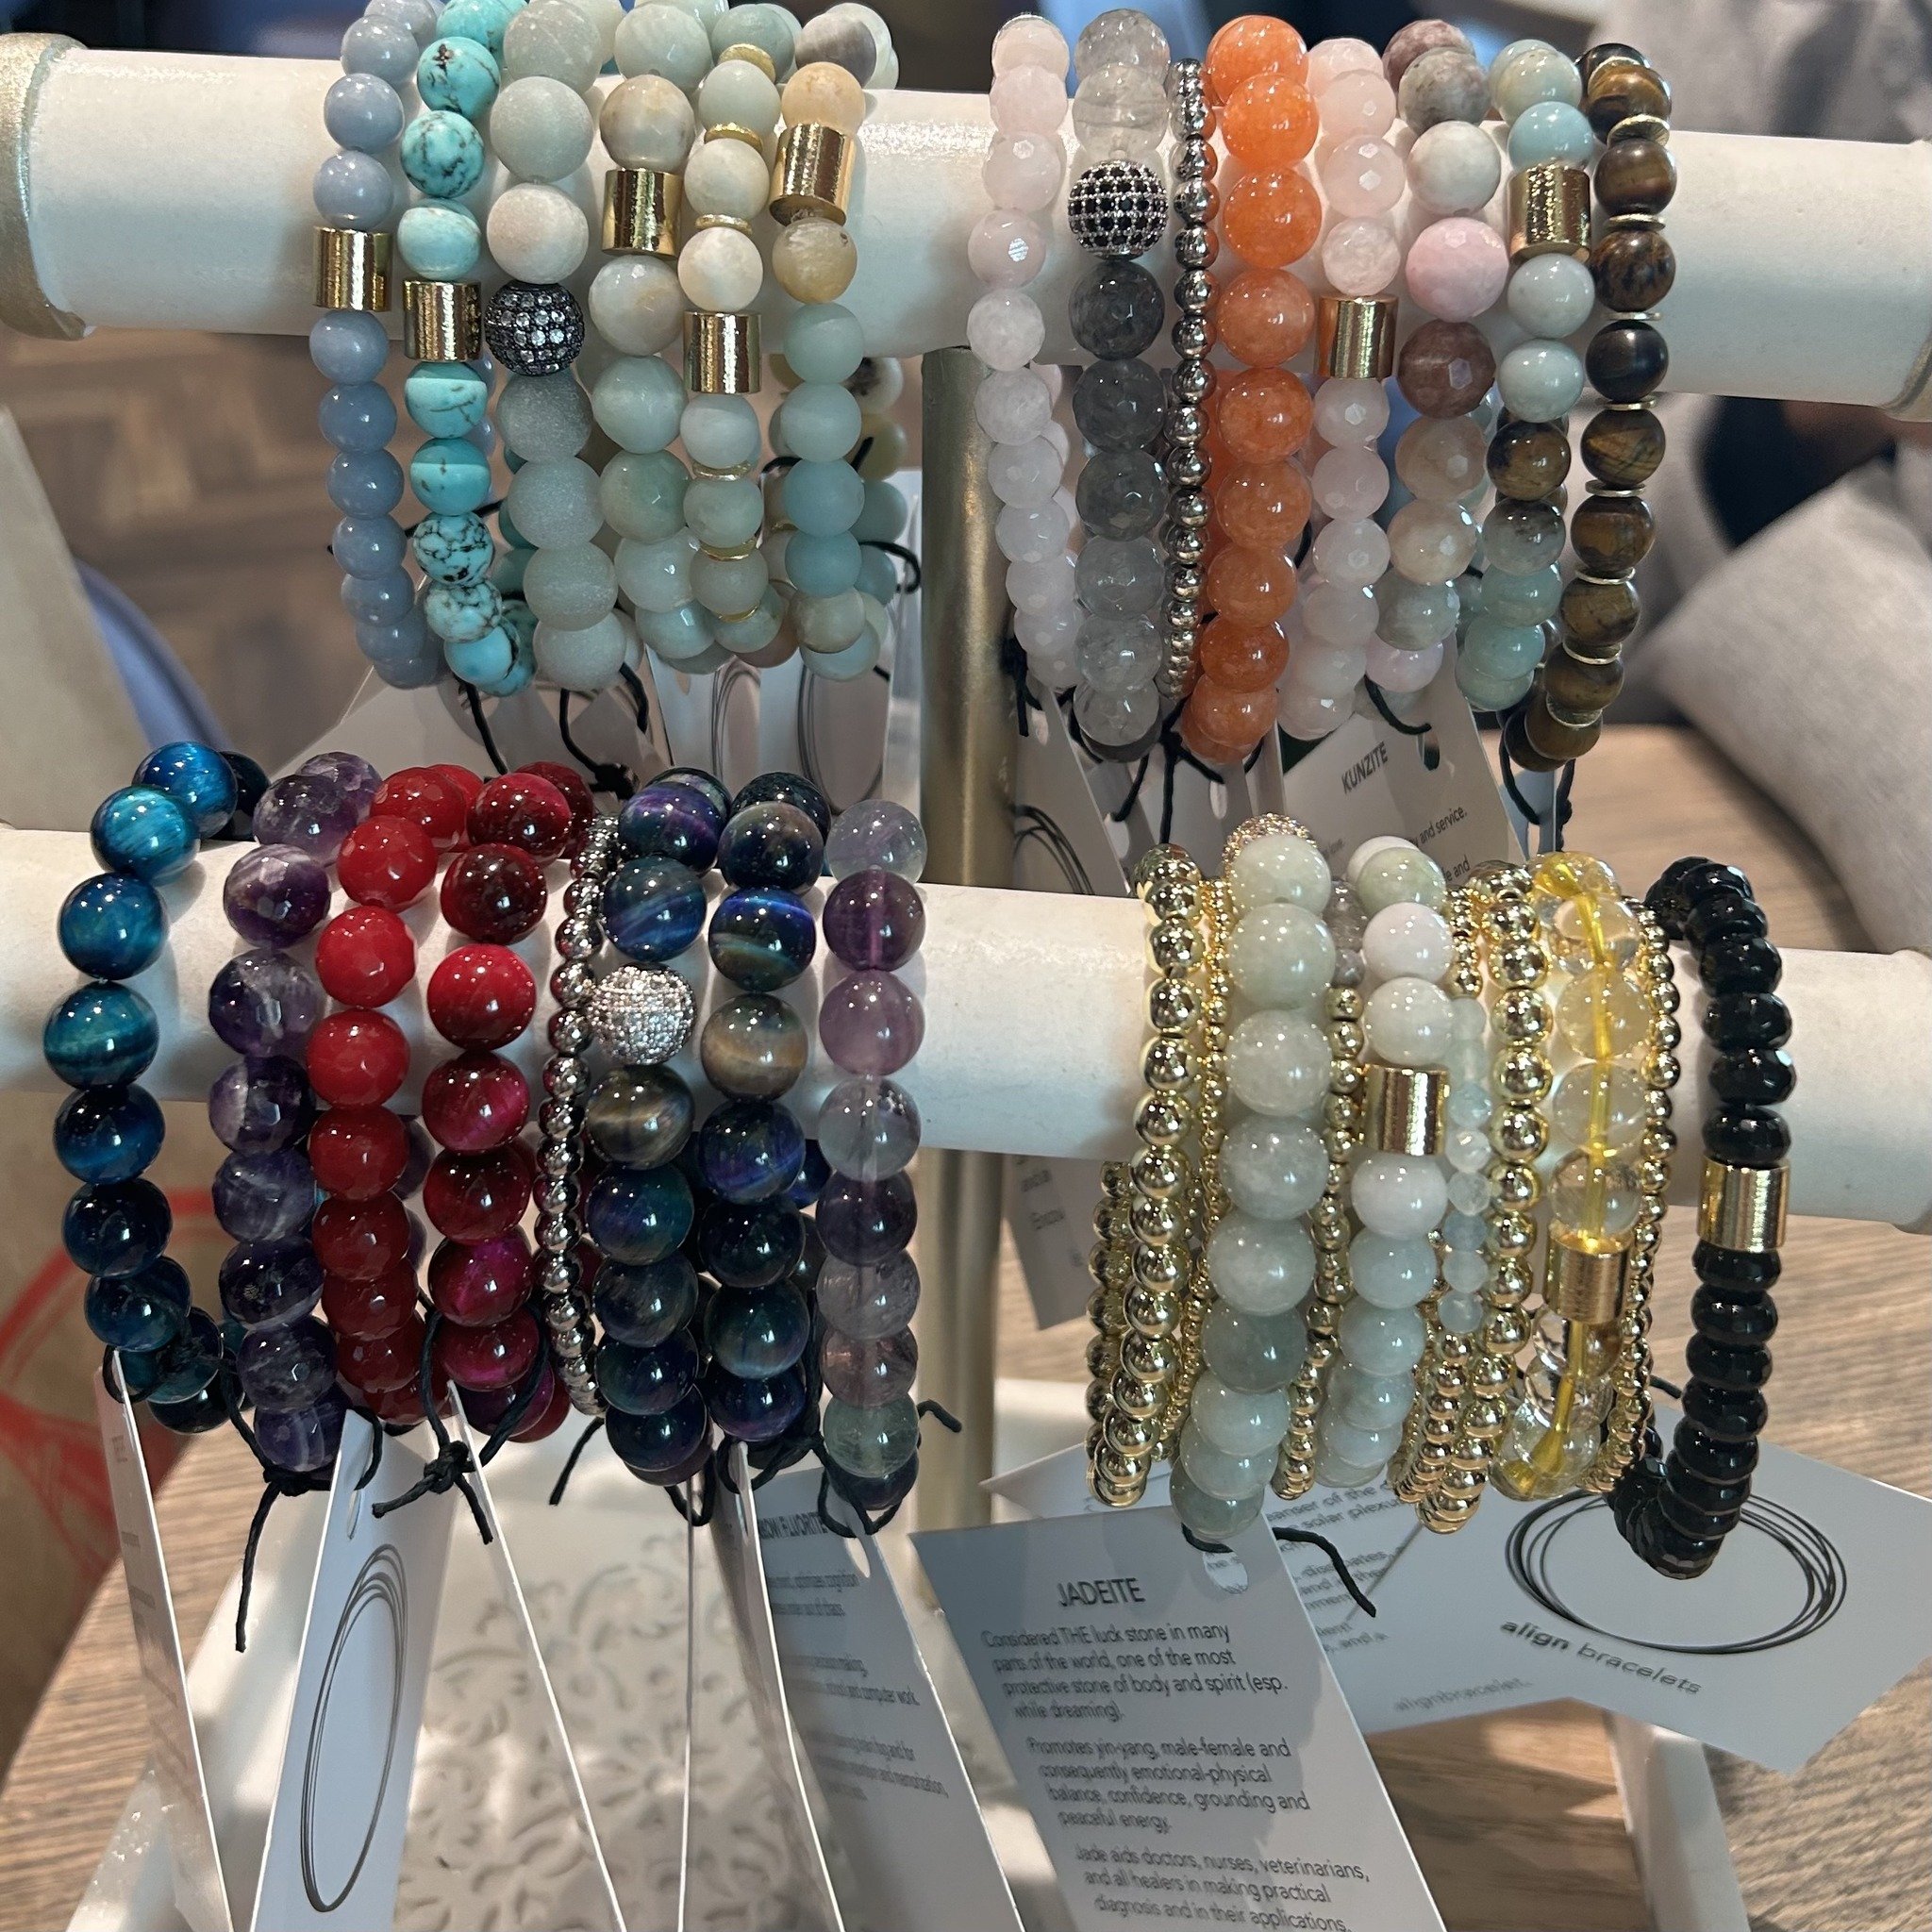 Mother's Day is just around the corner! We have some great gift options at the studio. Here are a few unique ideas! 
- stunning bracelets from Align - locally made by a wonderful female small business owner @alignbracelets 
- gift certificates availa